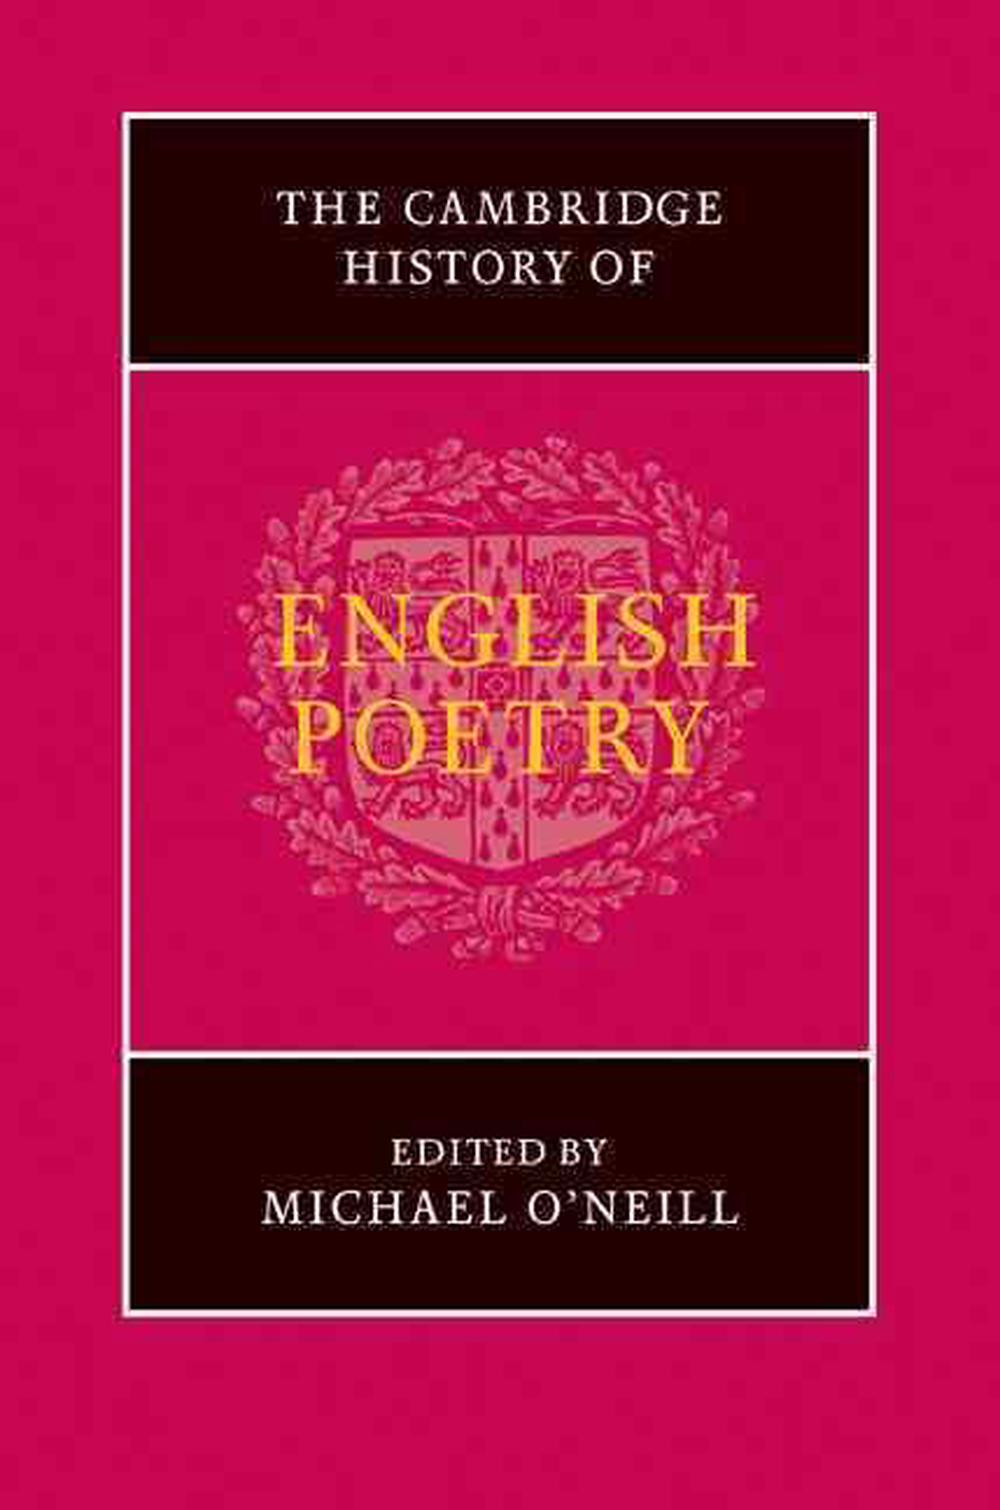 The Cambridge History of English Poetry by Michael O'Neill (English ...